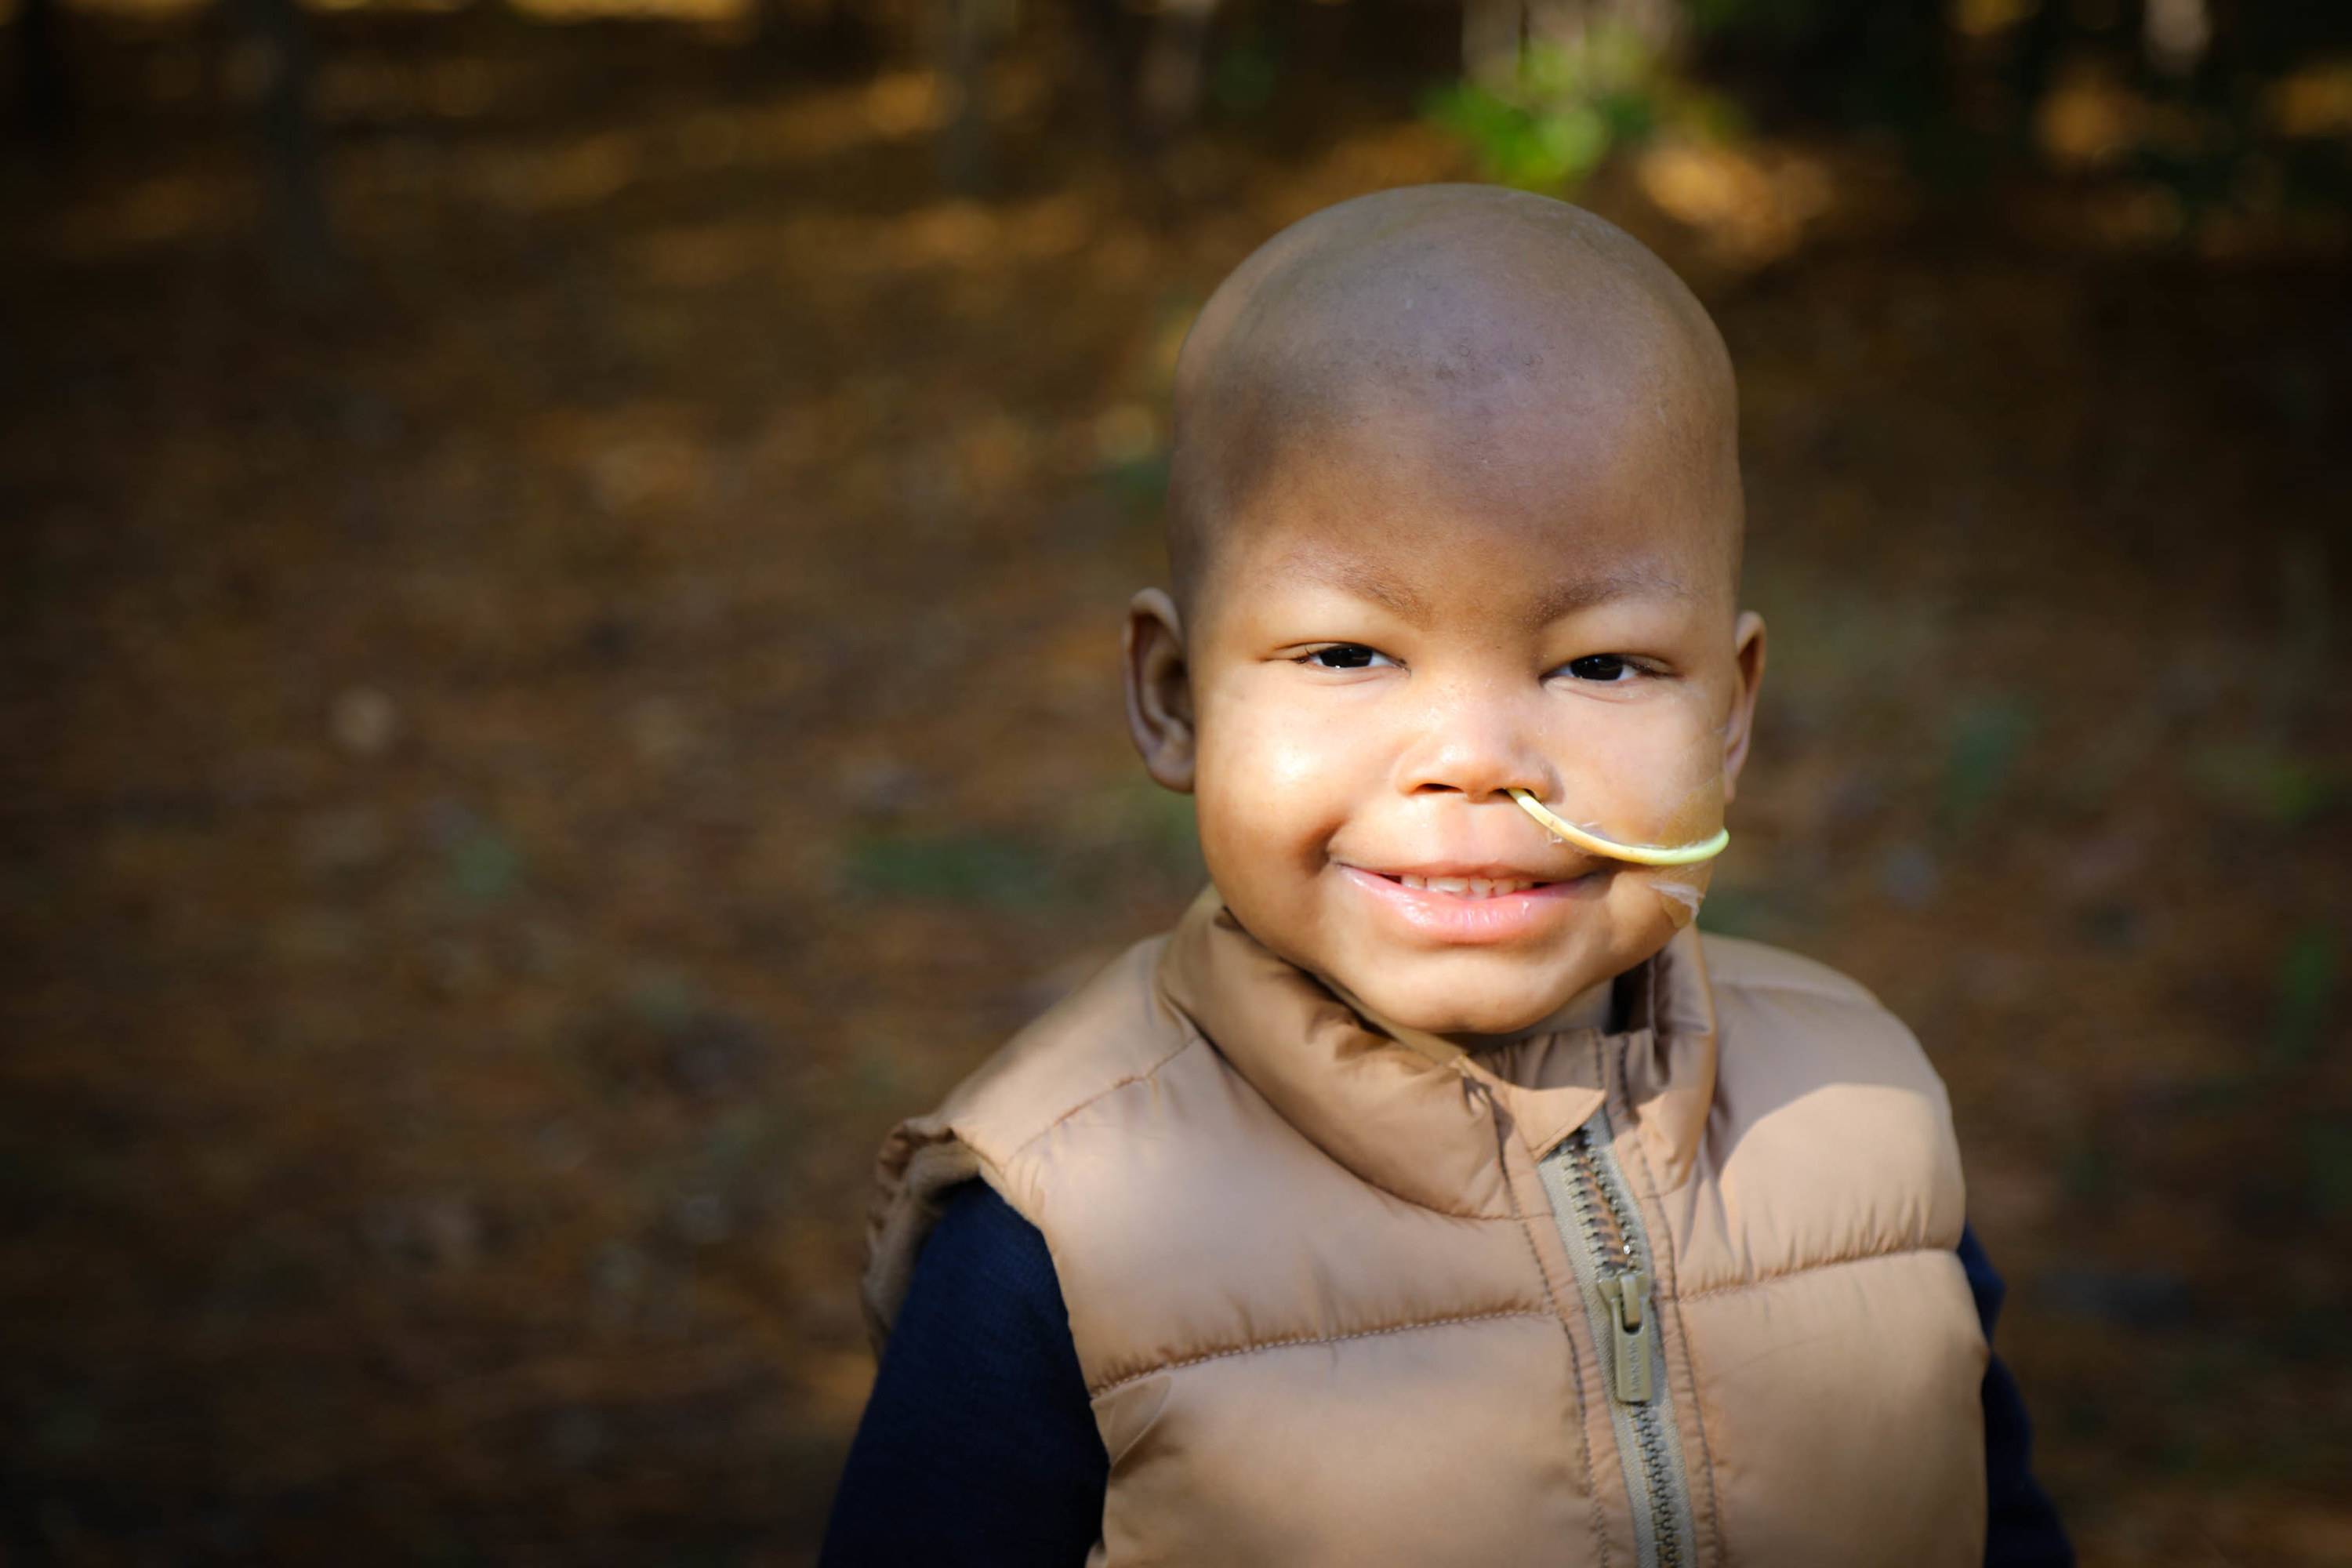 A young boy smiles with a tube in his nose